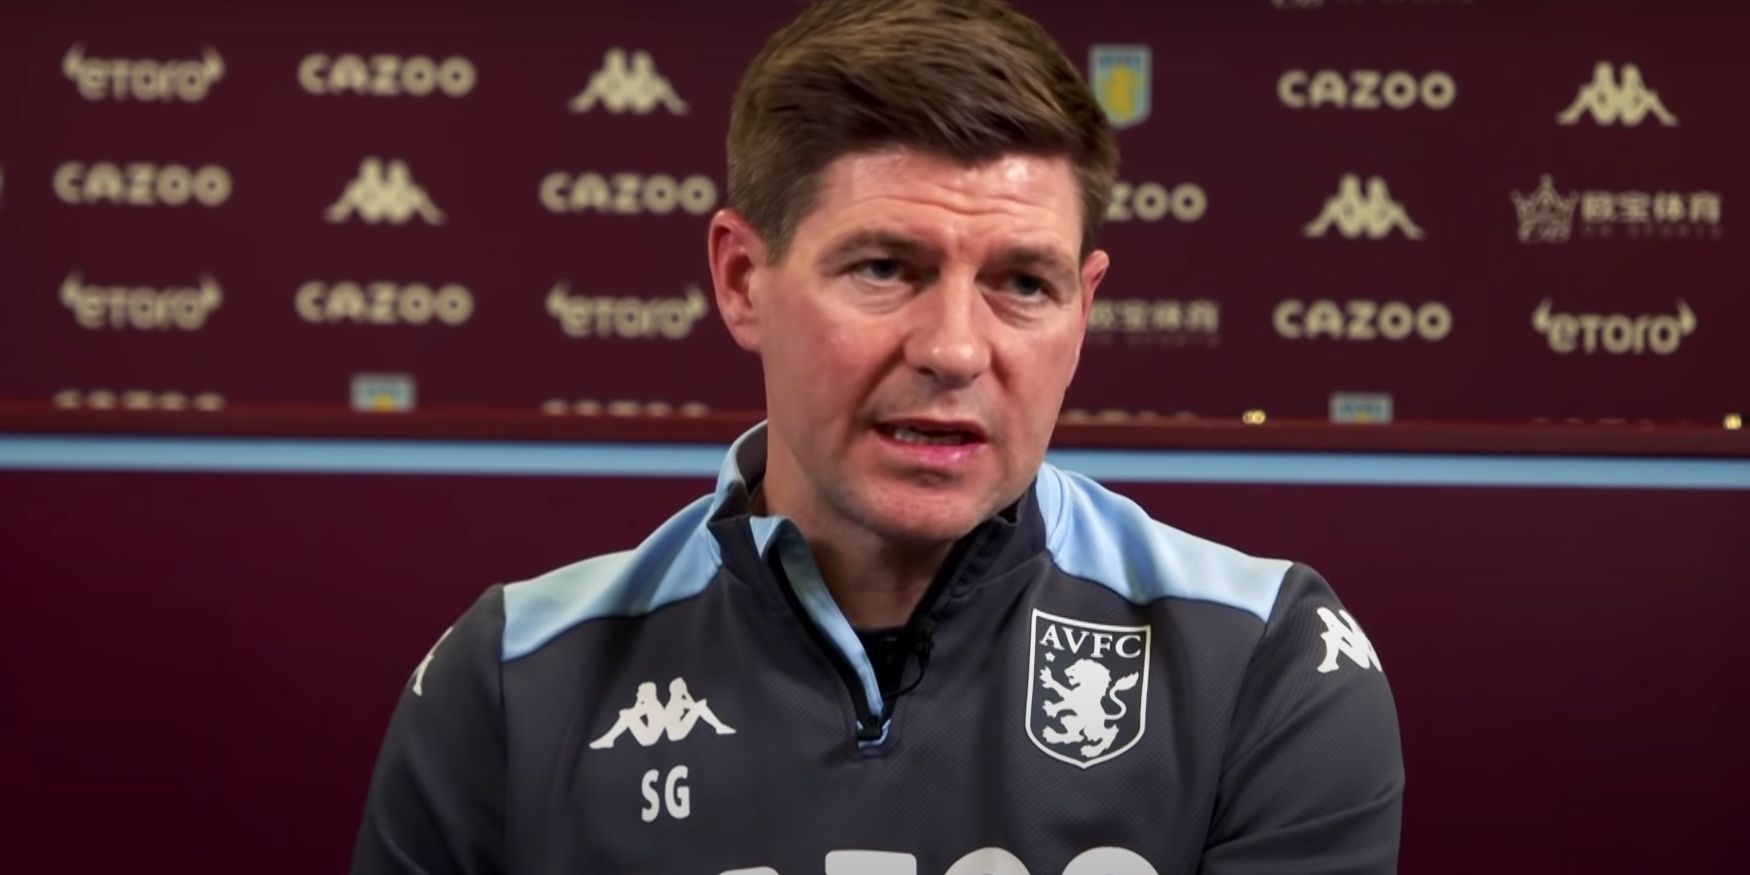 Steven Gerrard reveals his favourite meal after being asked a series of questions in Q&A